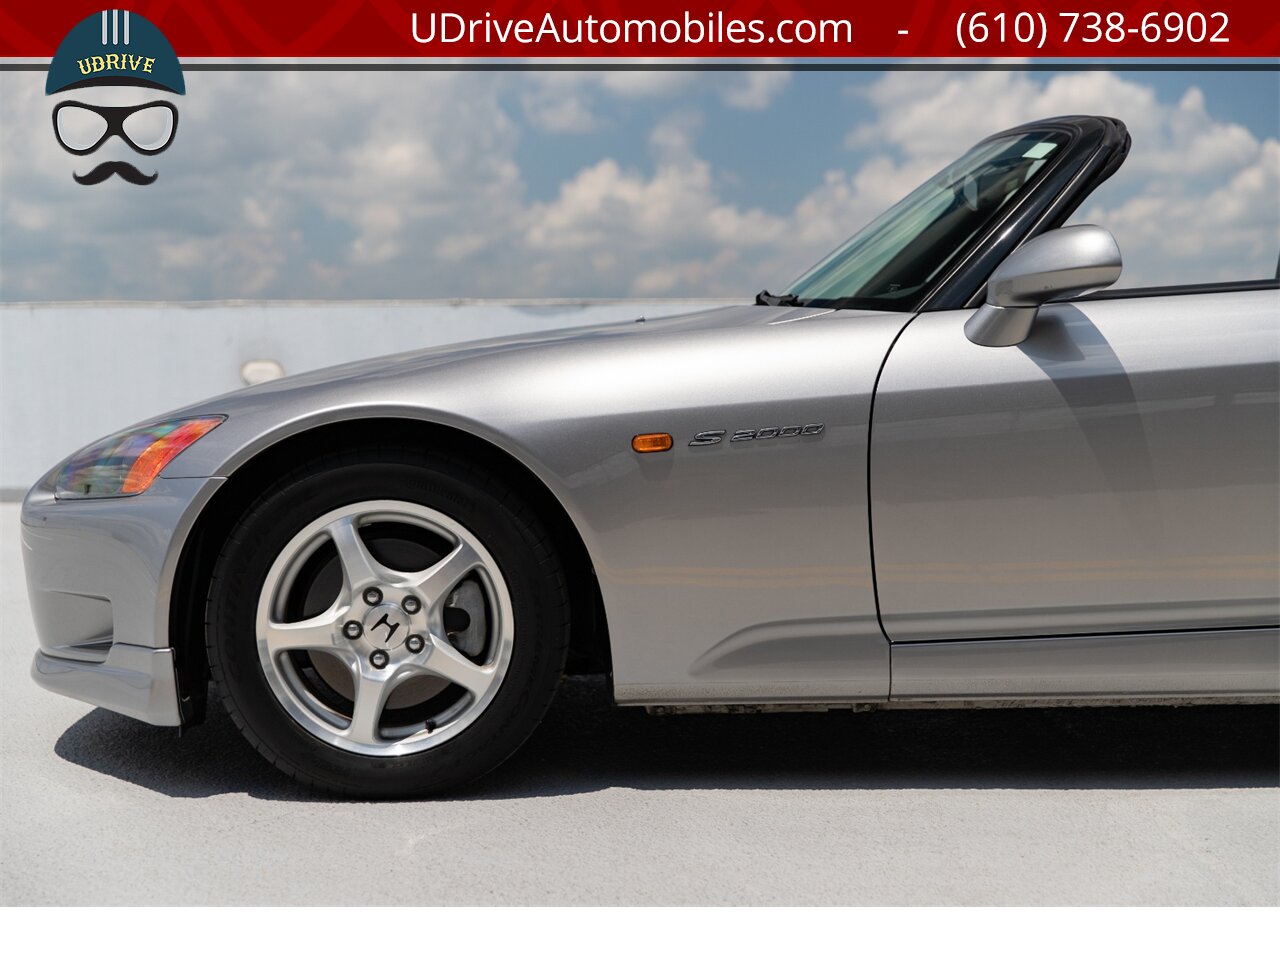 2001 Honda S2000 9k Miles Same Owner Since 2001 Service History   - Photo 6 - West Chester, PA 19382